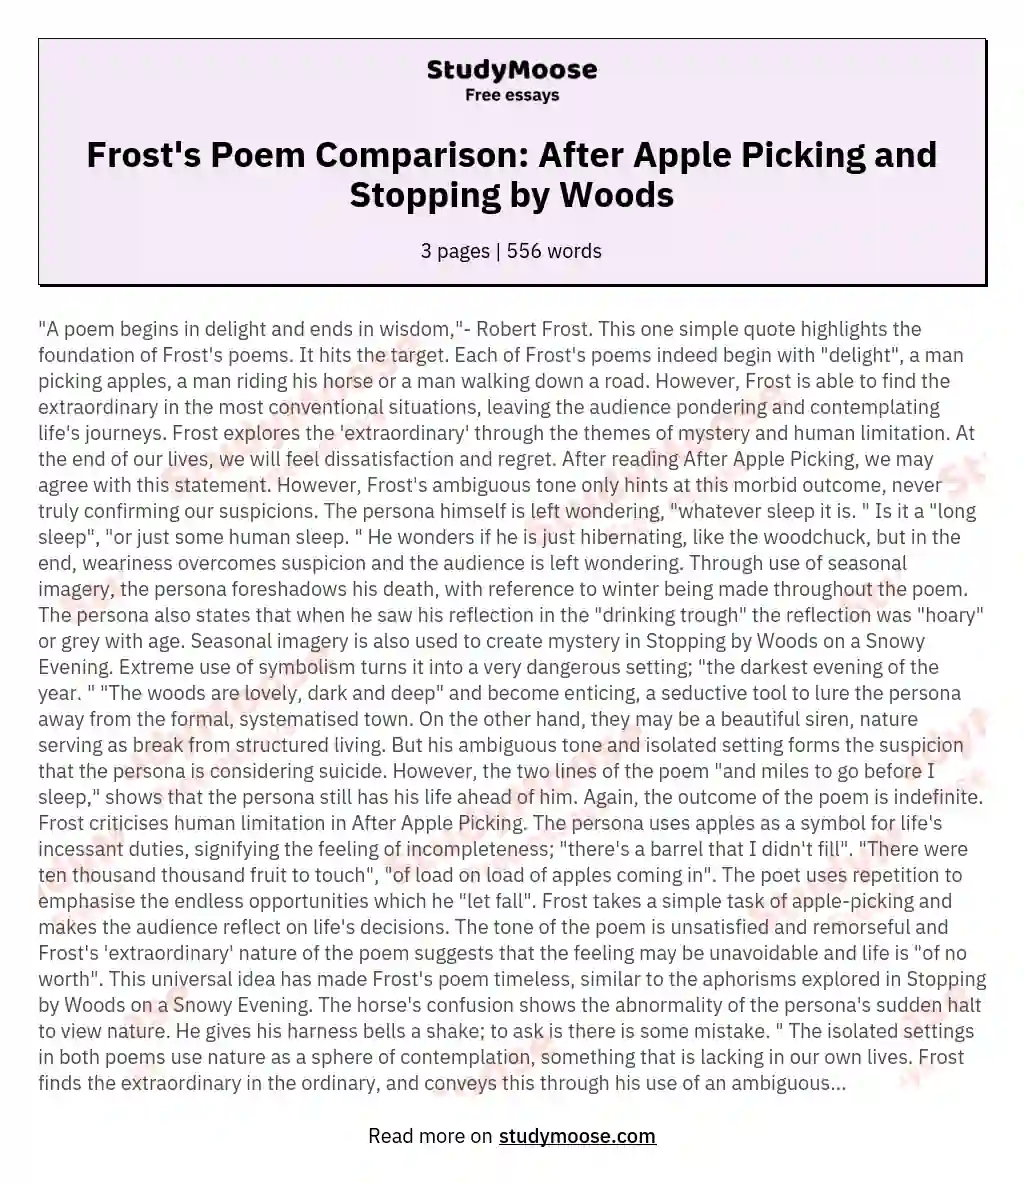 Analysis of Robert Frost's "After Apple Picking" and "Stopping by Woods on a Snowy Evening"